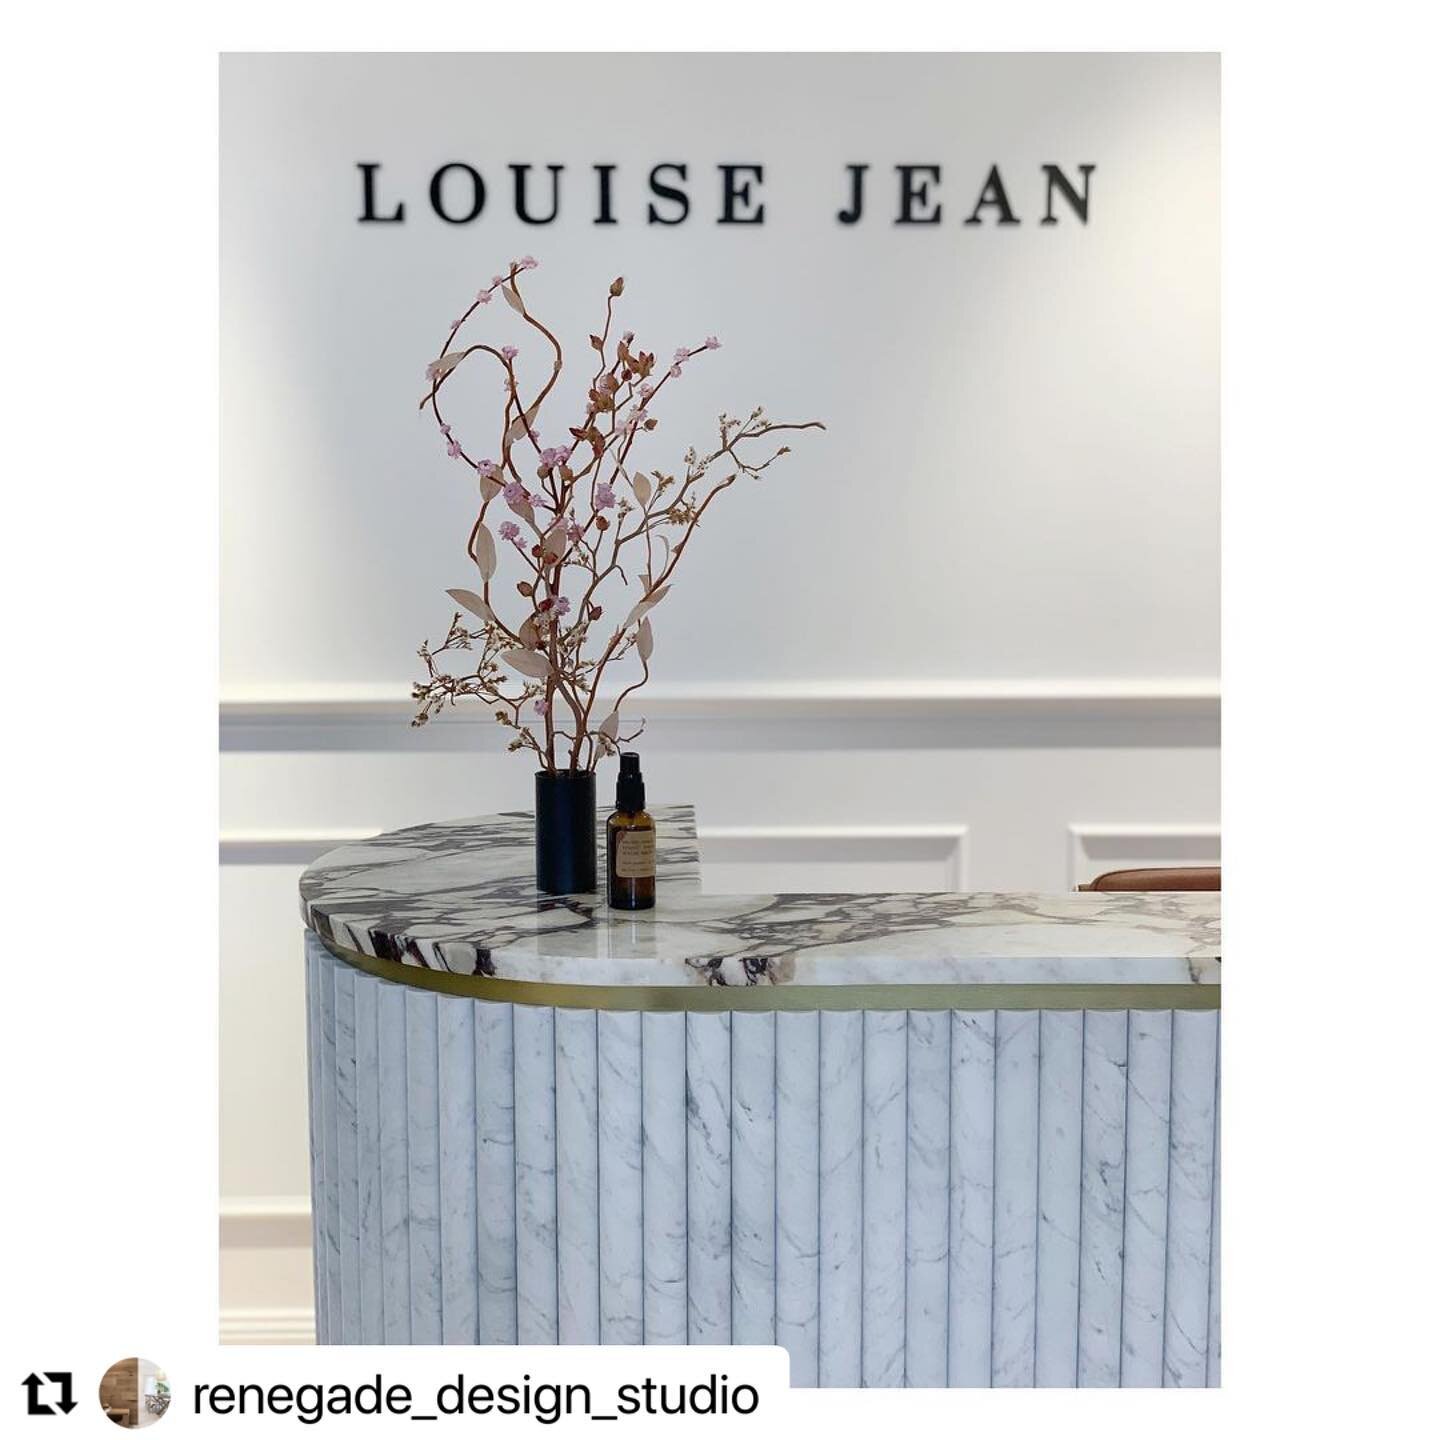 The recent fit out of the Louise Jean jewellery showroom at Peregian Beach with stunning design by @renegade_design_studio using our very well selected Carrara Flute tiles. Supplied by @ceramicasenio these 940mm individual flutes are reinforced and a